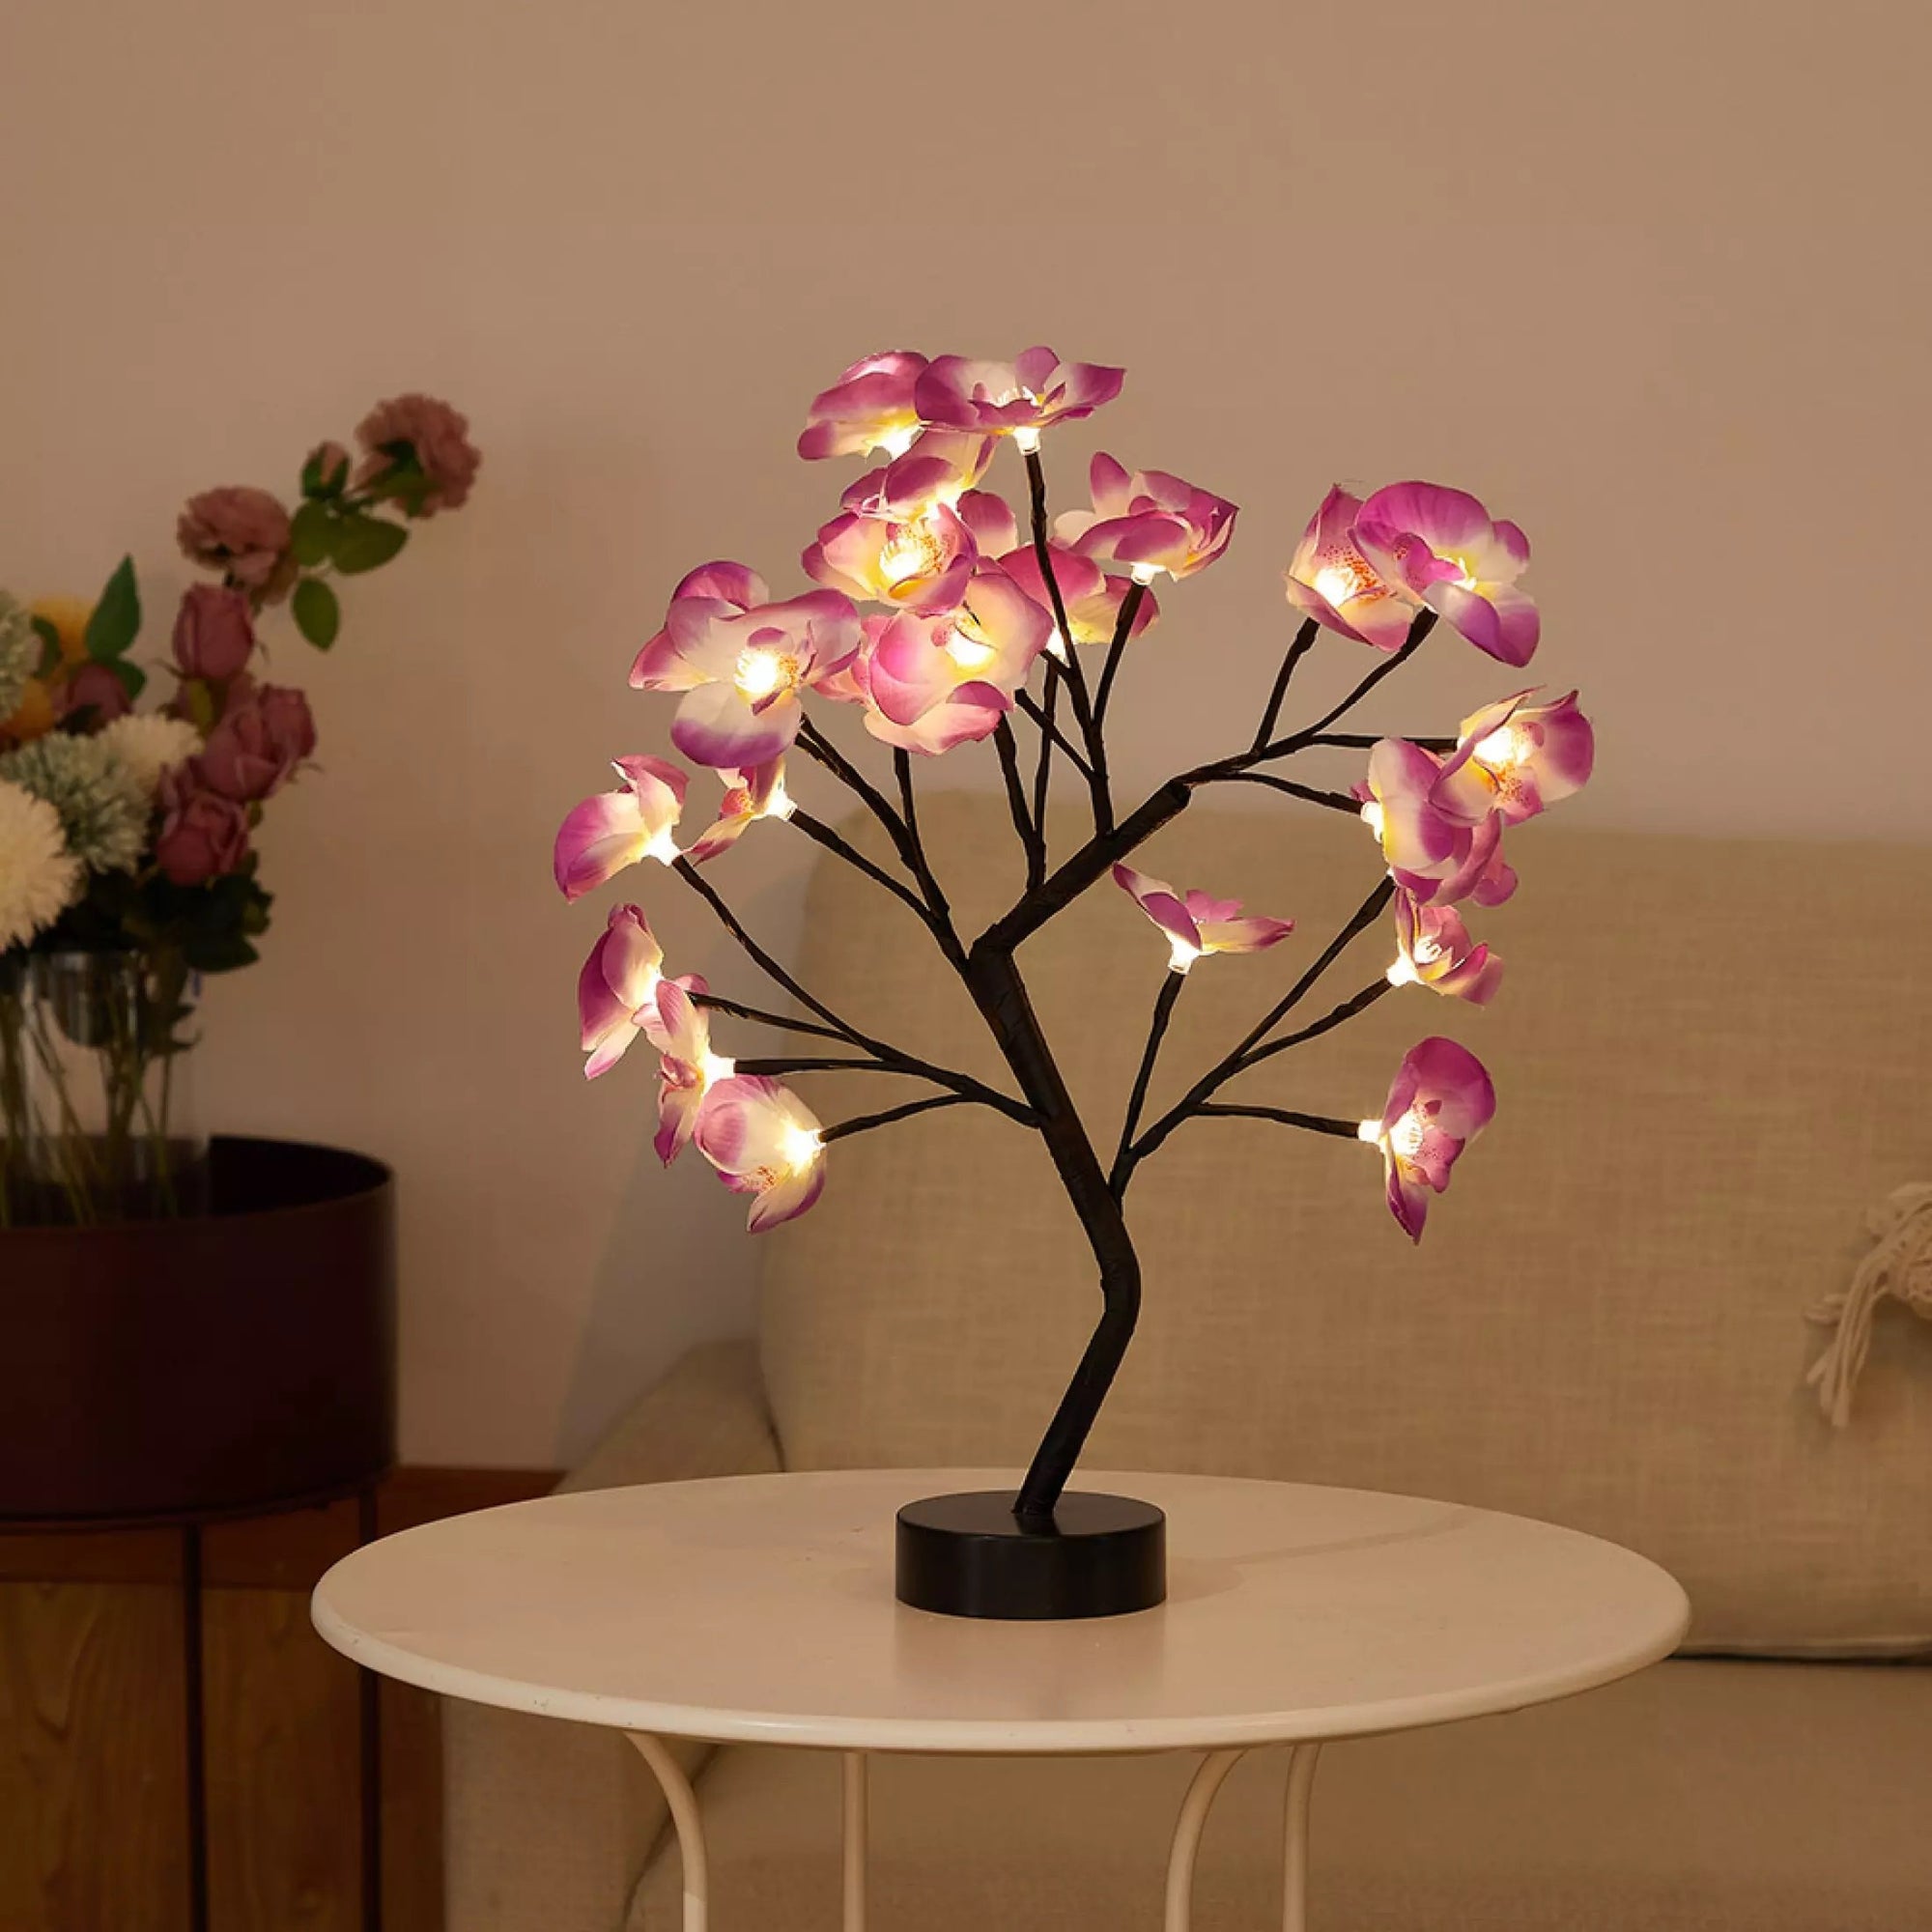 The Everlasting Orchid Lamp - Sparkly Trees